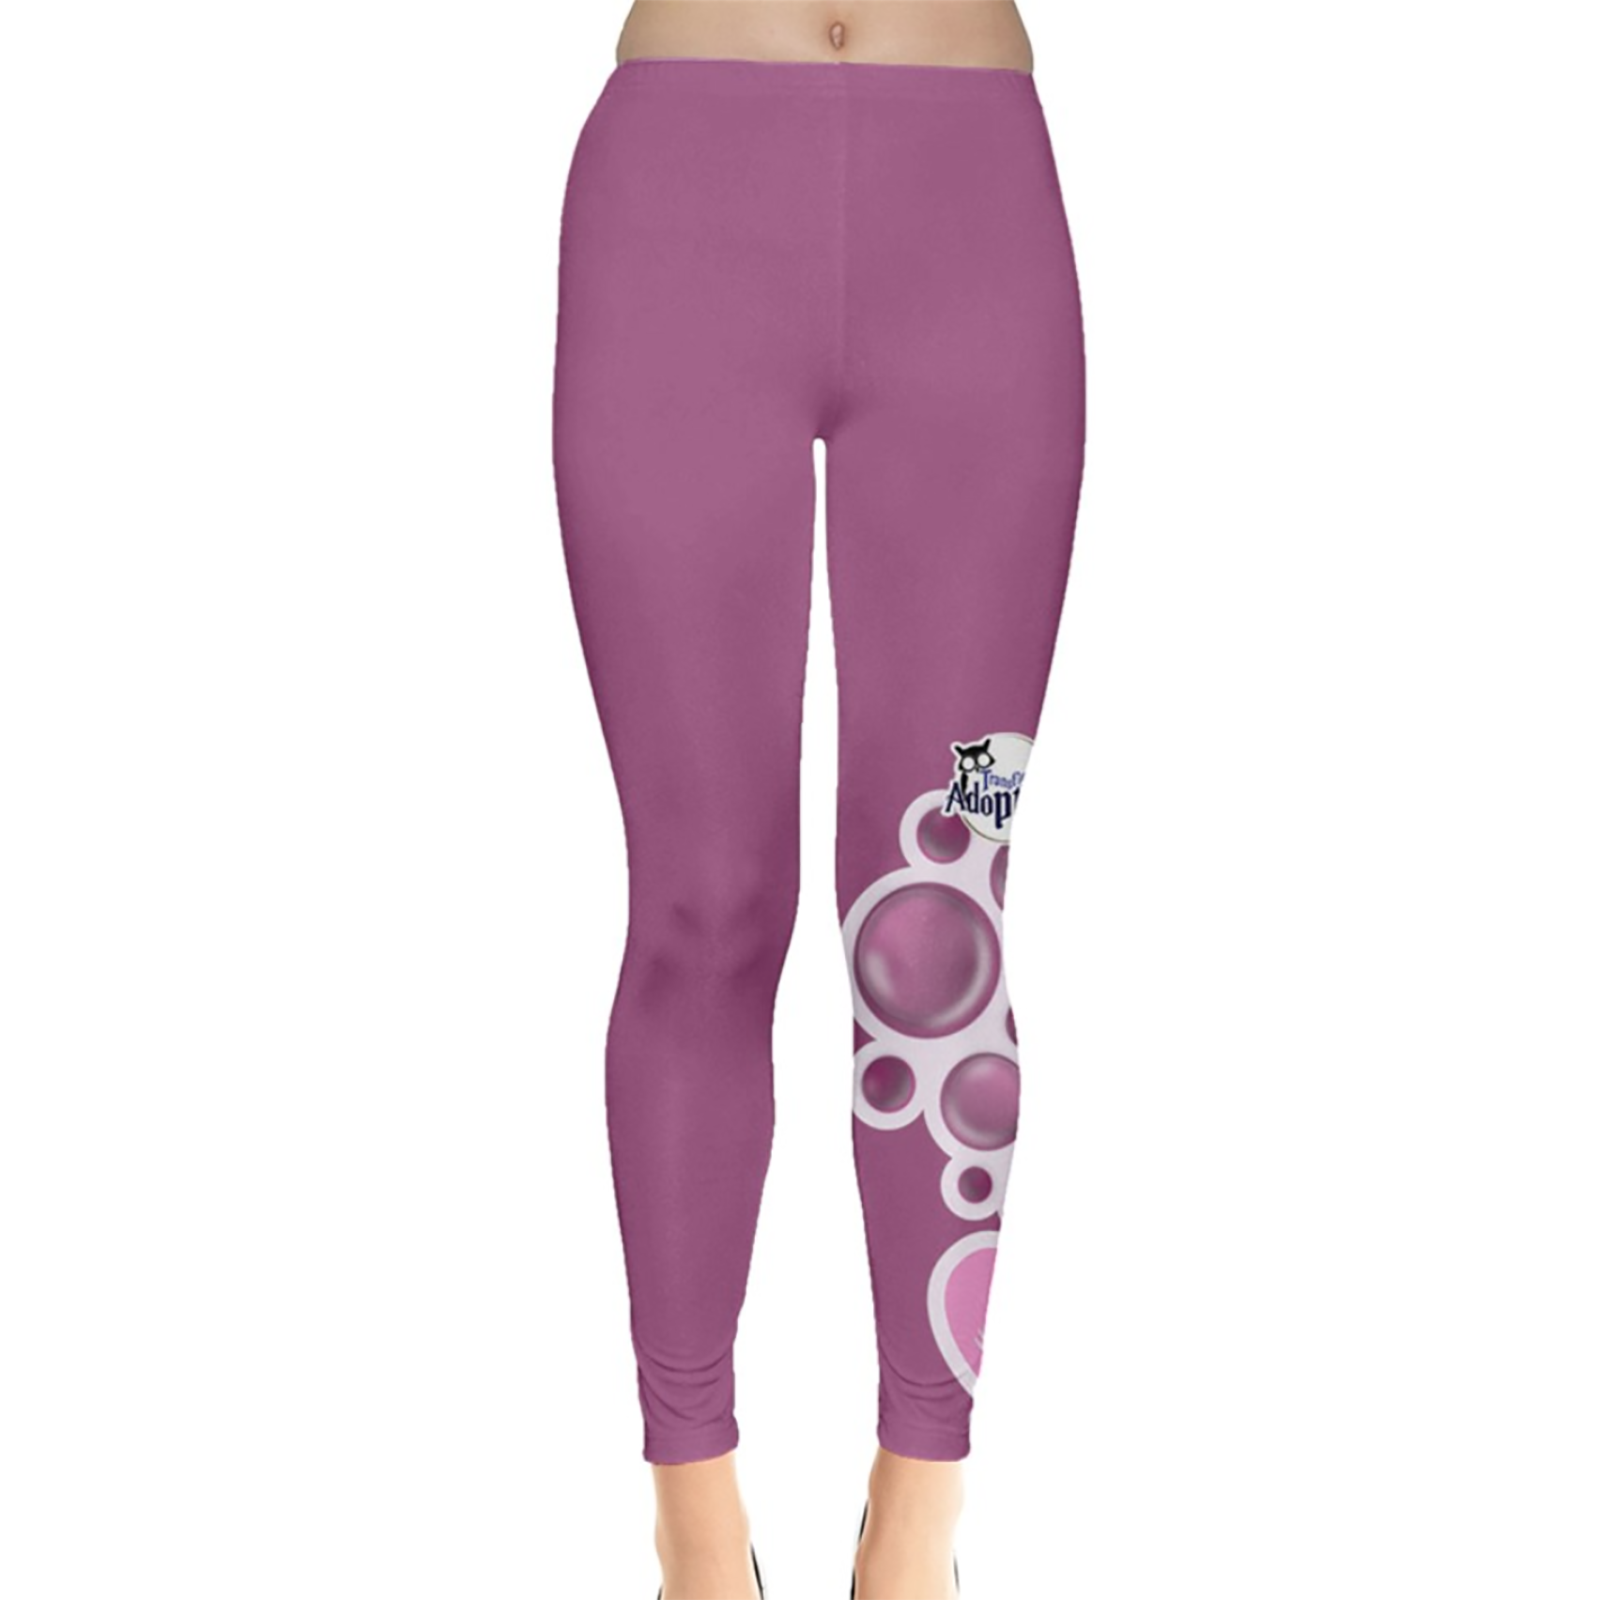 Charmed Leggings (Pink Solid w/Love Potion)